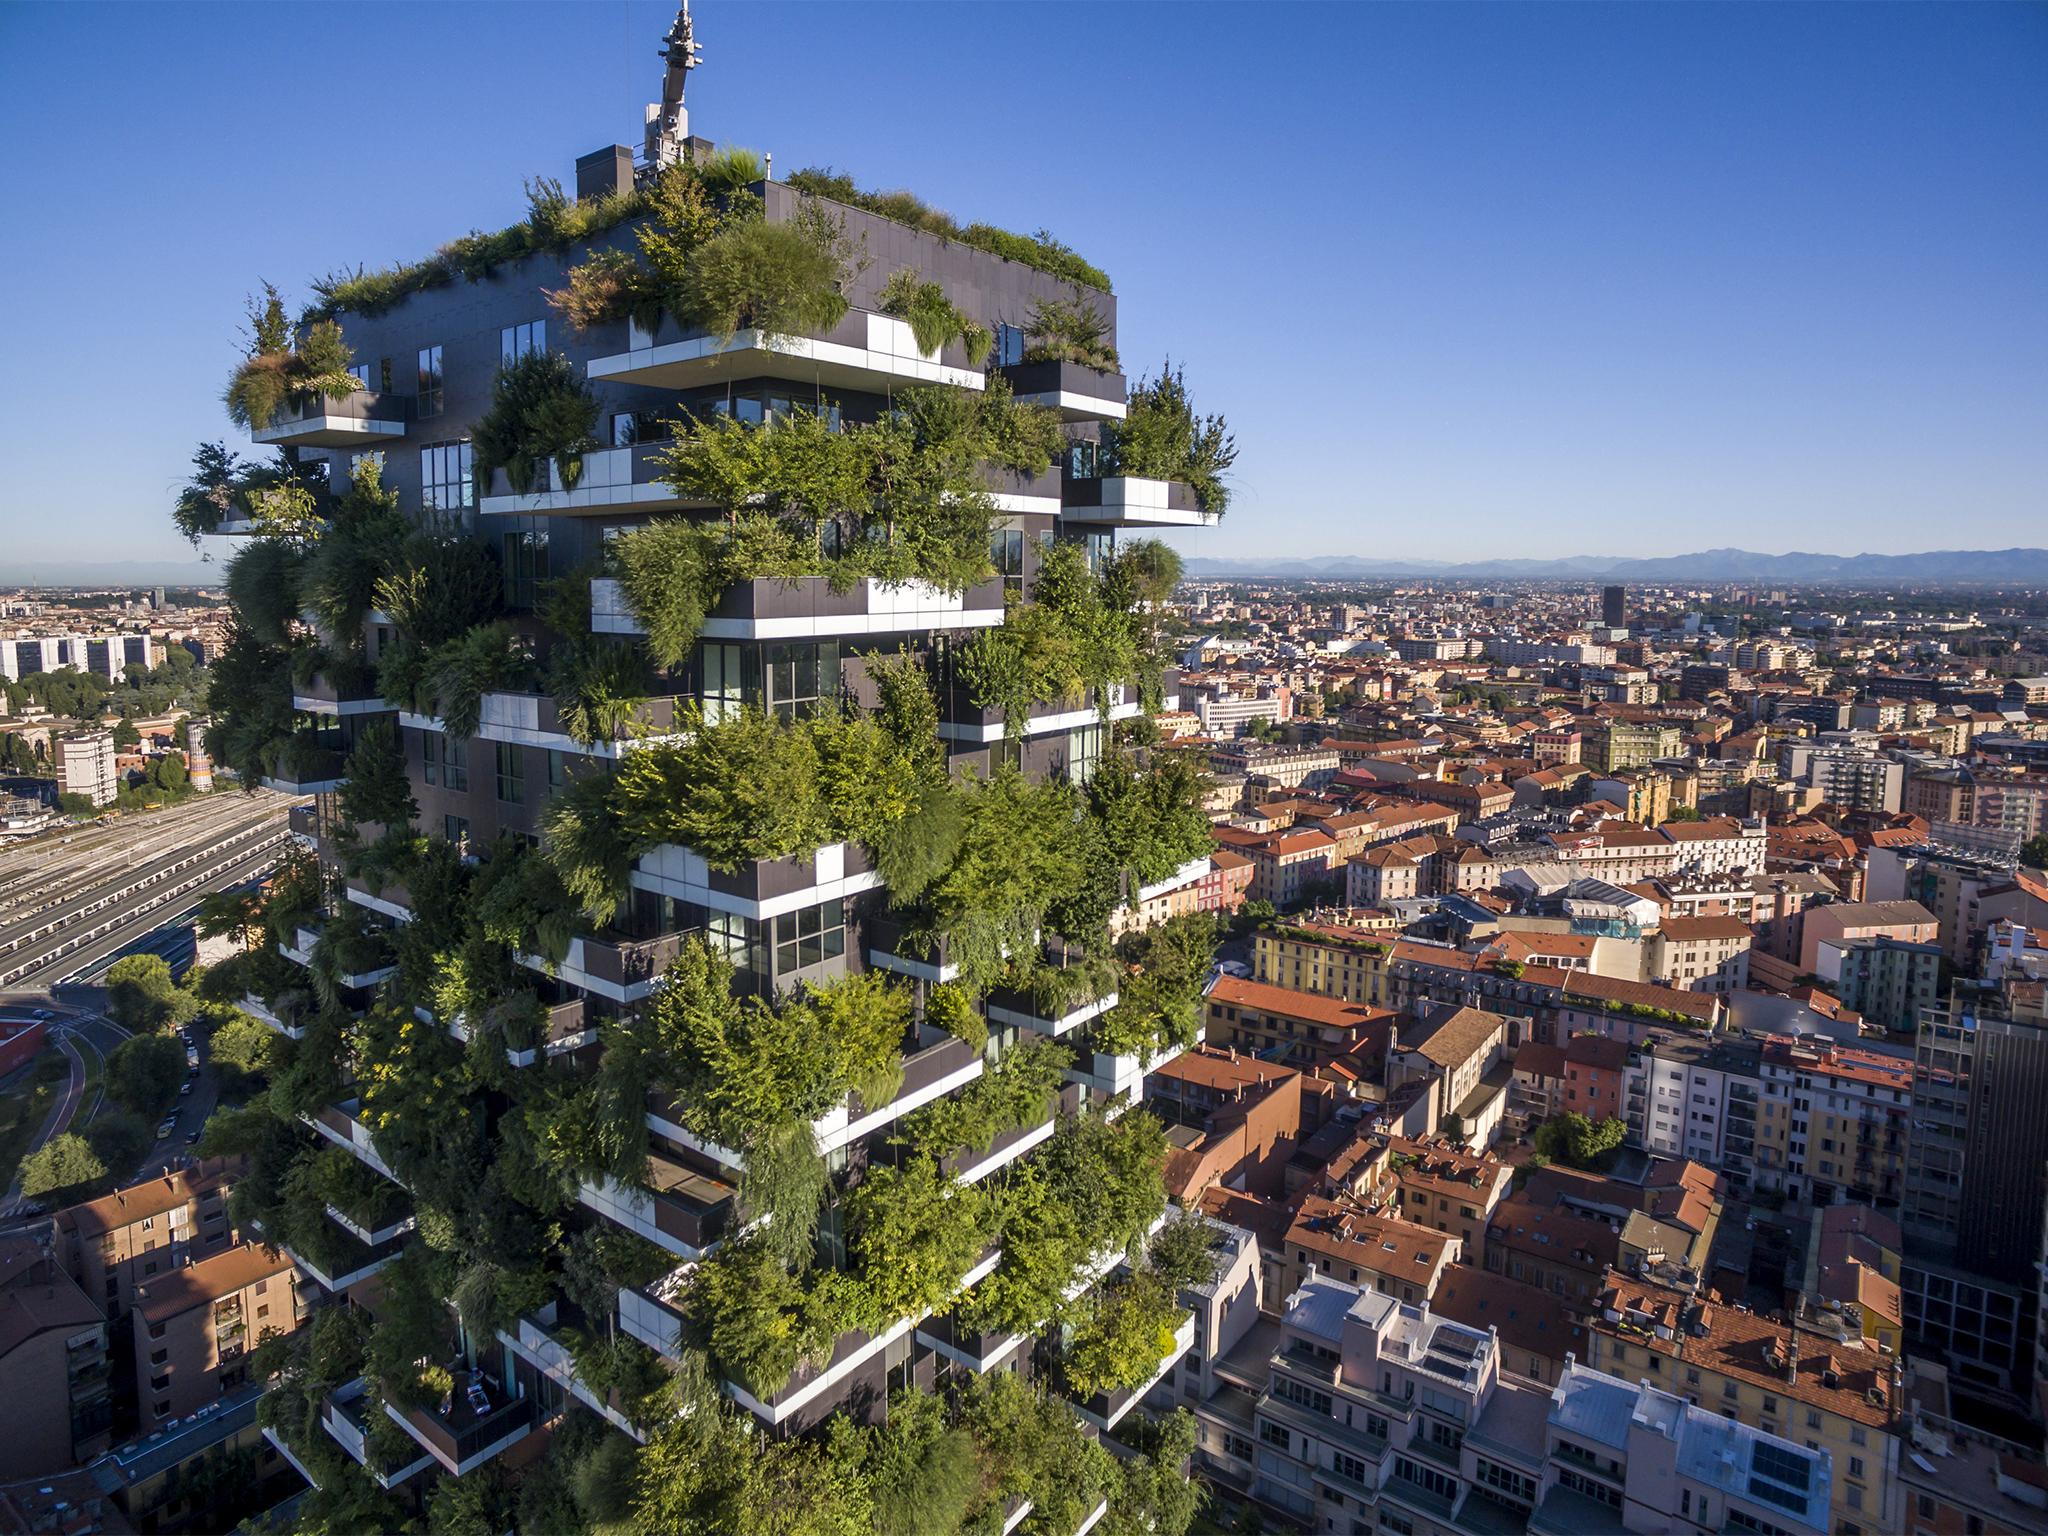 The Bosco Verticale in Milan is the first real-world example of the vertical forest concept